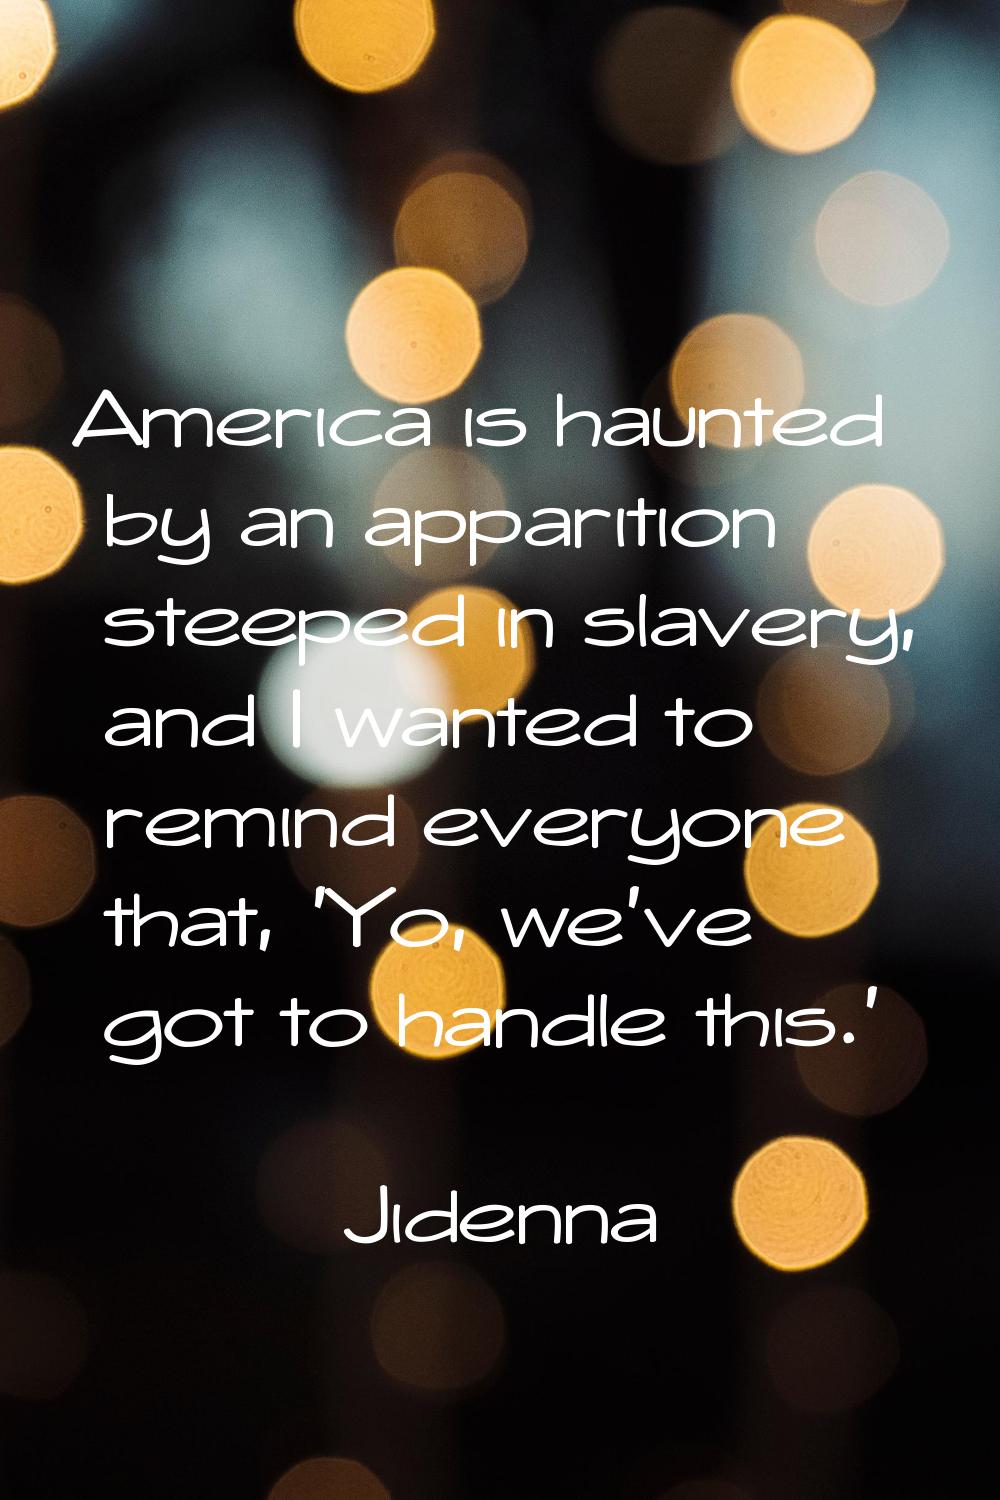 America is haunted by an apparition steeped in slavery, and I wanted to remind everyone that, 'Yo, 